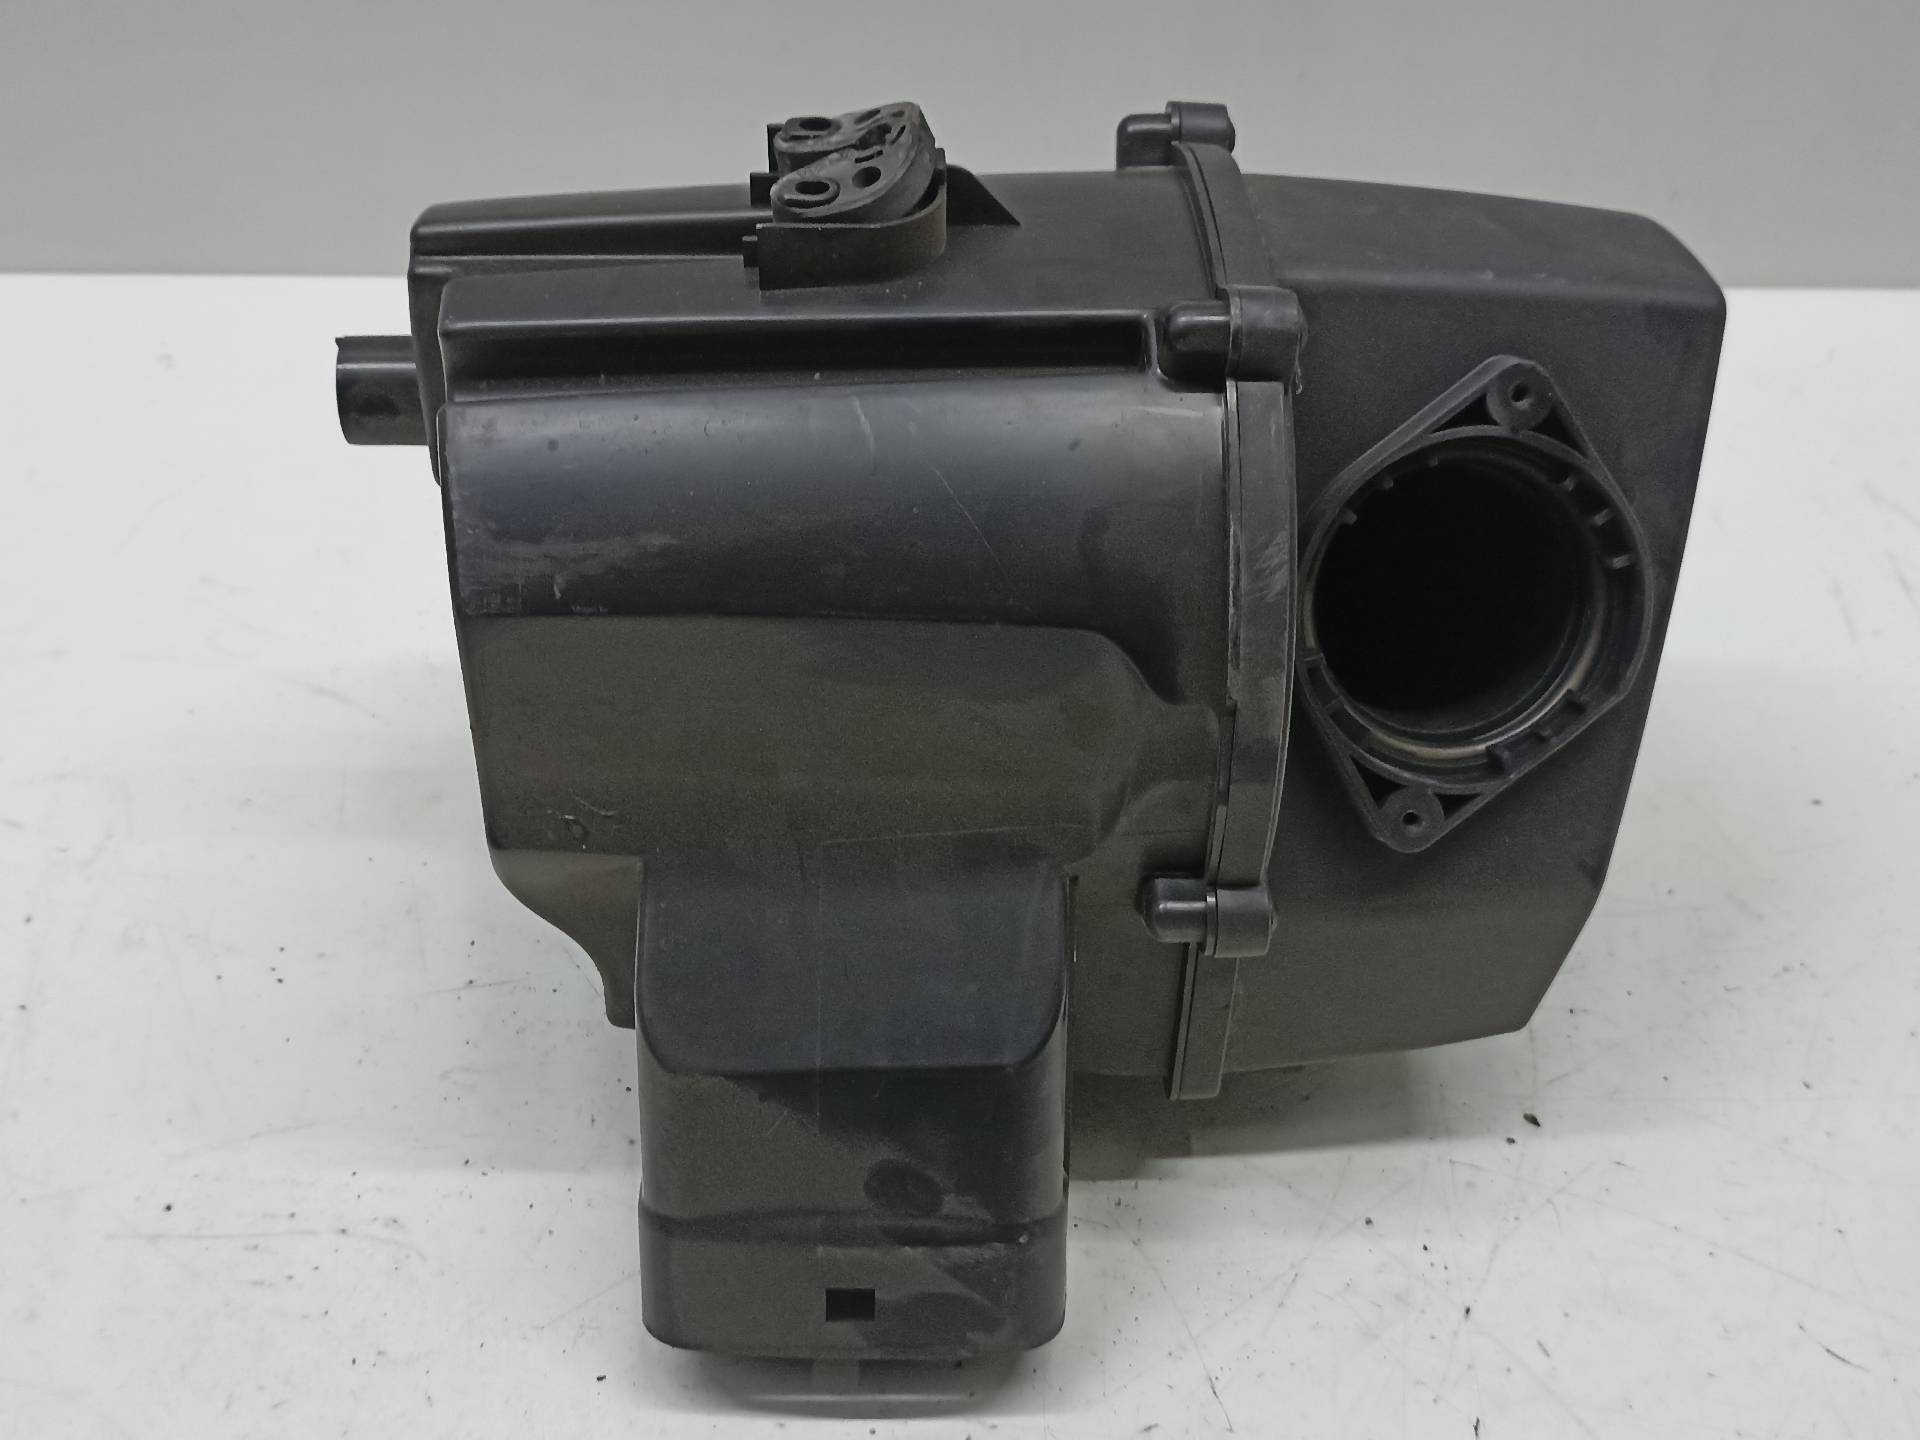 SEAT Ibiza 4 generation (2008-2017) Other Engine Compartment Parts 6R0129601C, 320564571211, 211 24314354